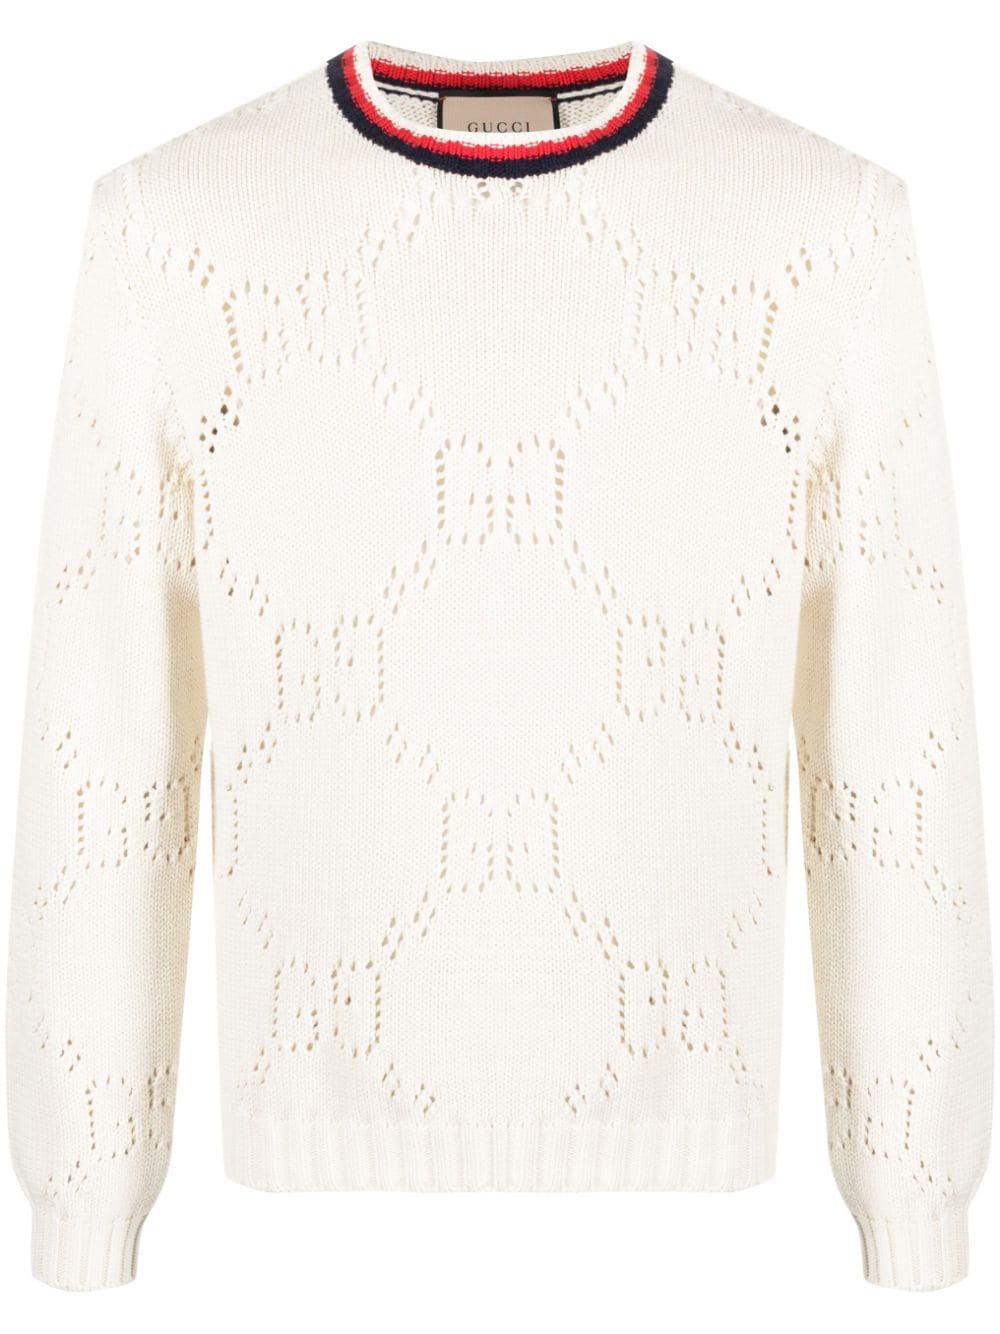 Gucci Perforated Gg Cotton Sweater In White